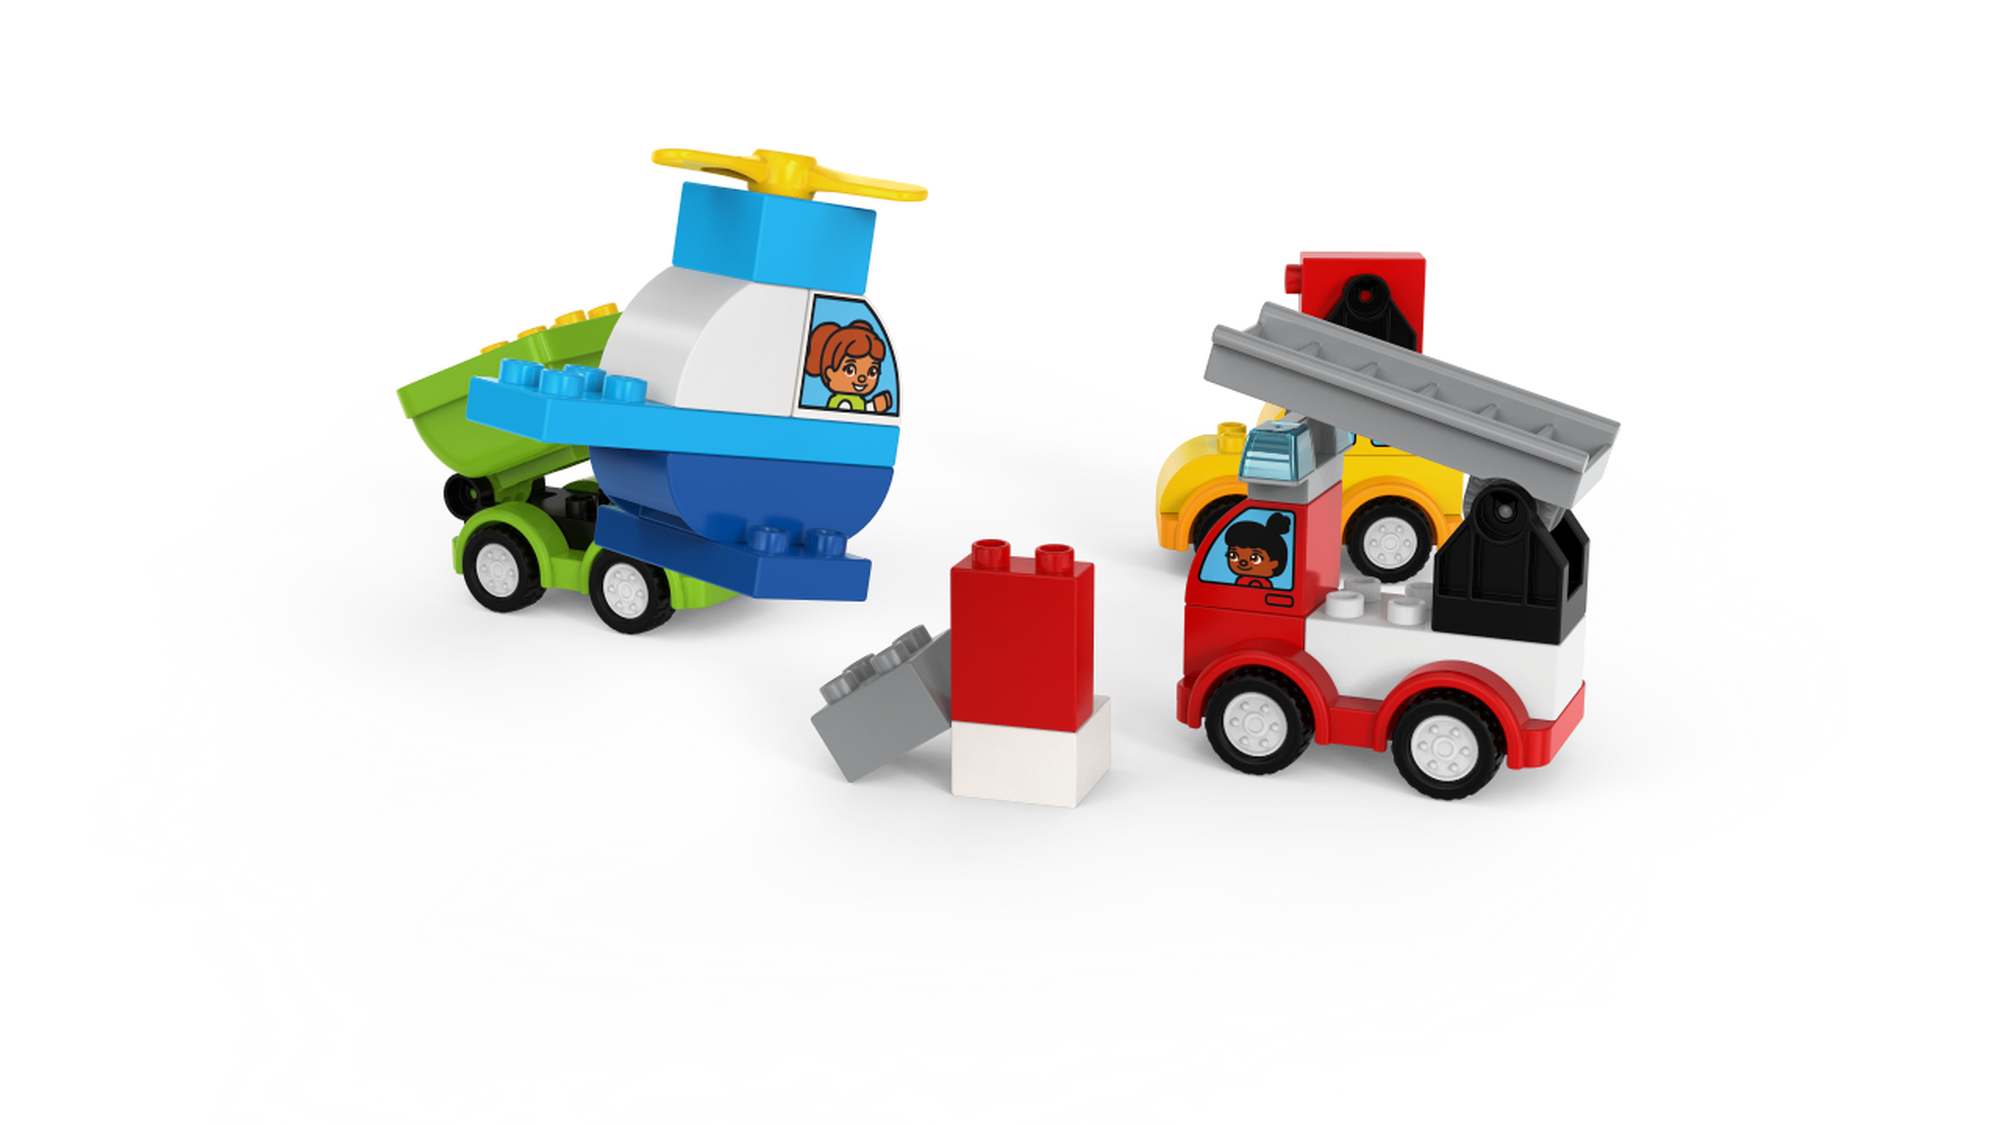 Lego Duplo My First Car Creations Multicolor